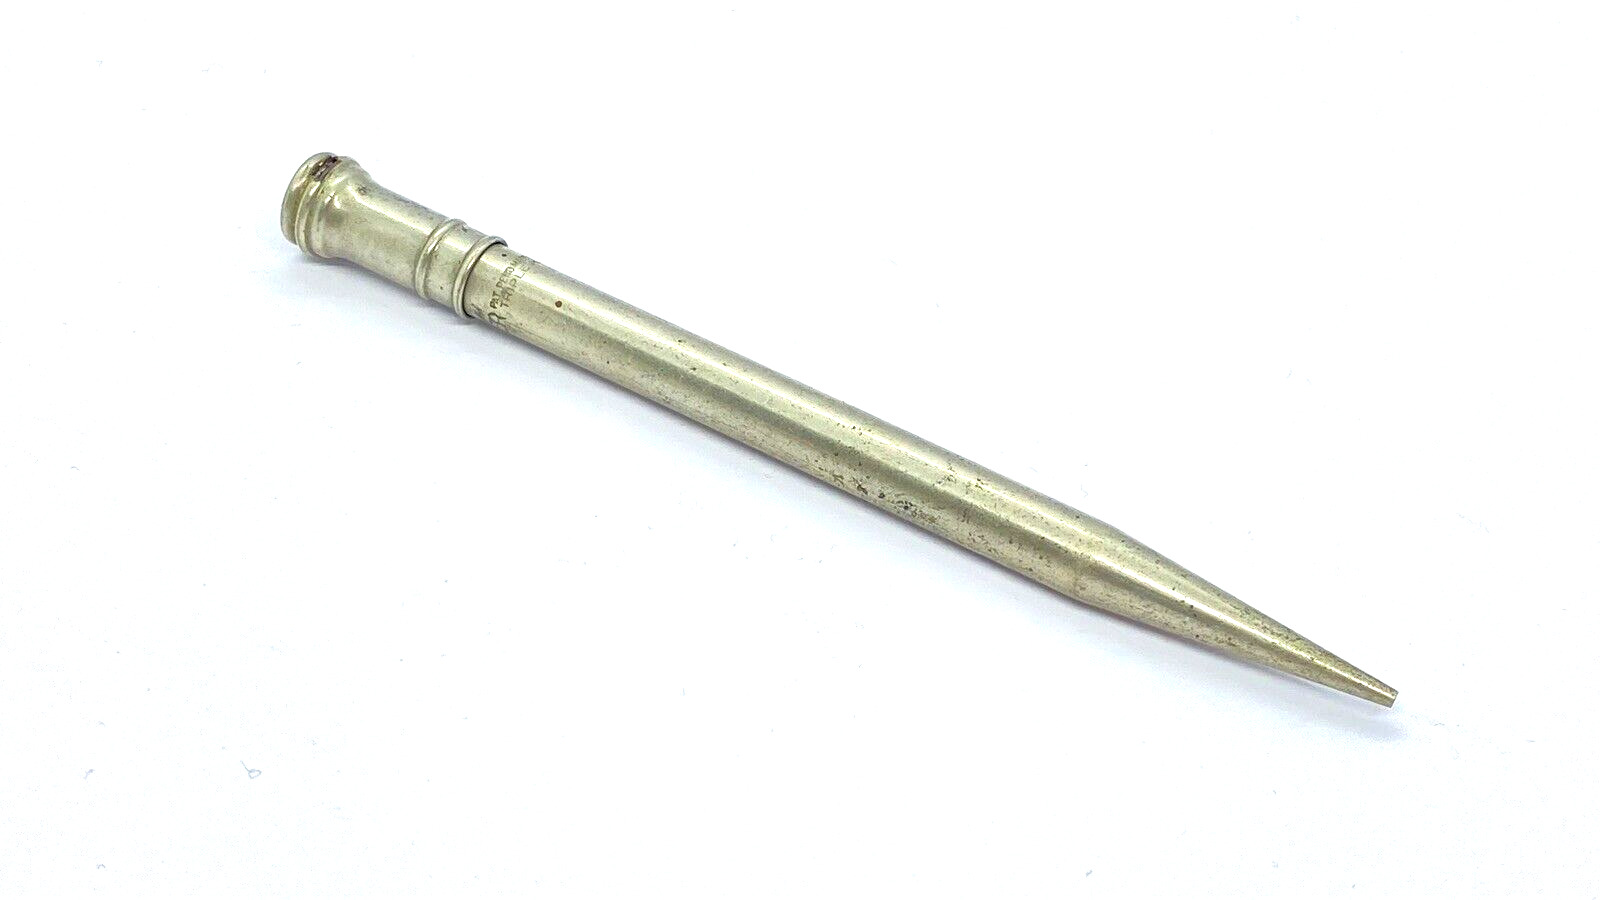 VINTAGE PARKER METAL PENCIL IN TRIPLE SILVER PLATED MADE IN USA PAT. PENDING